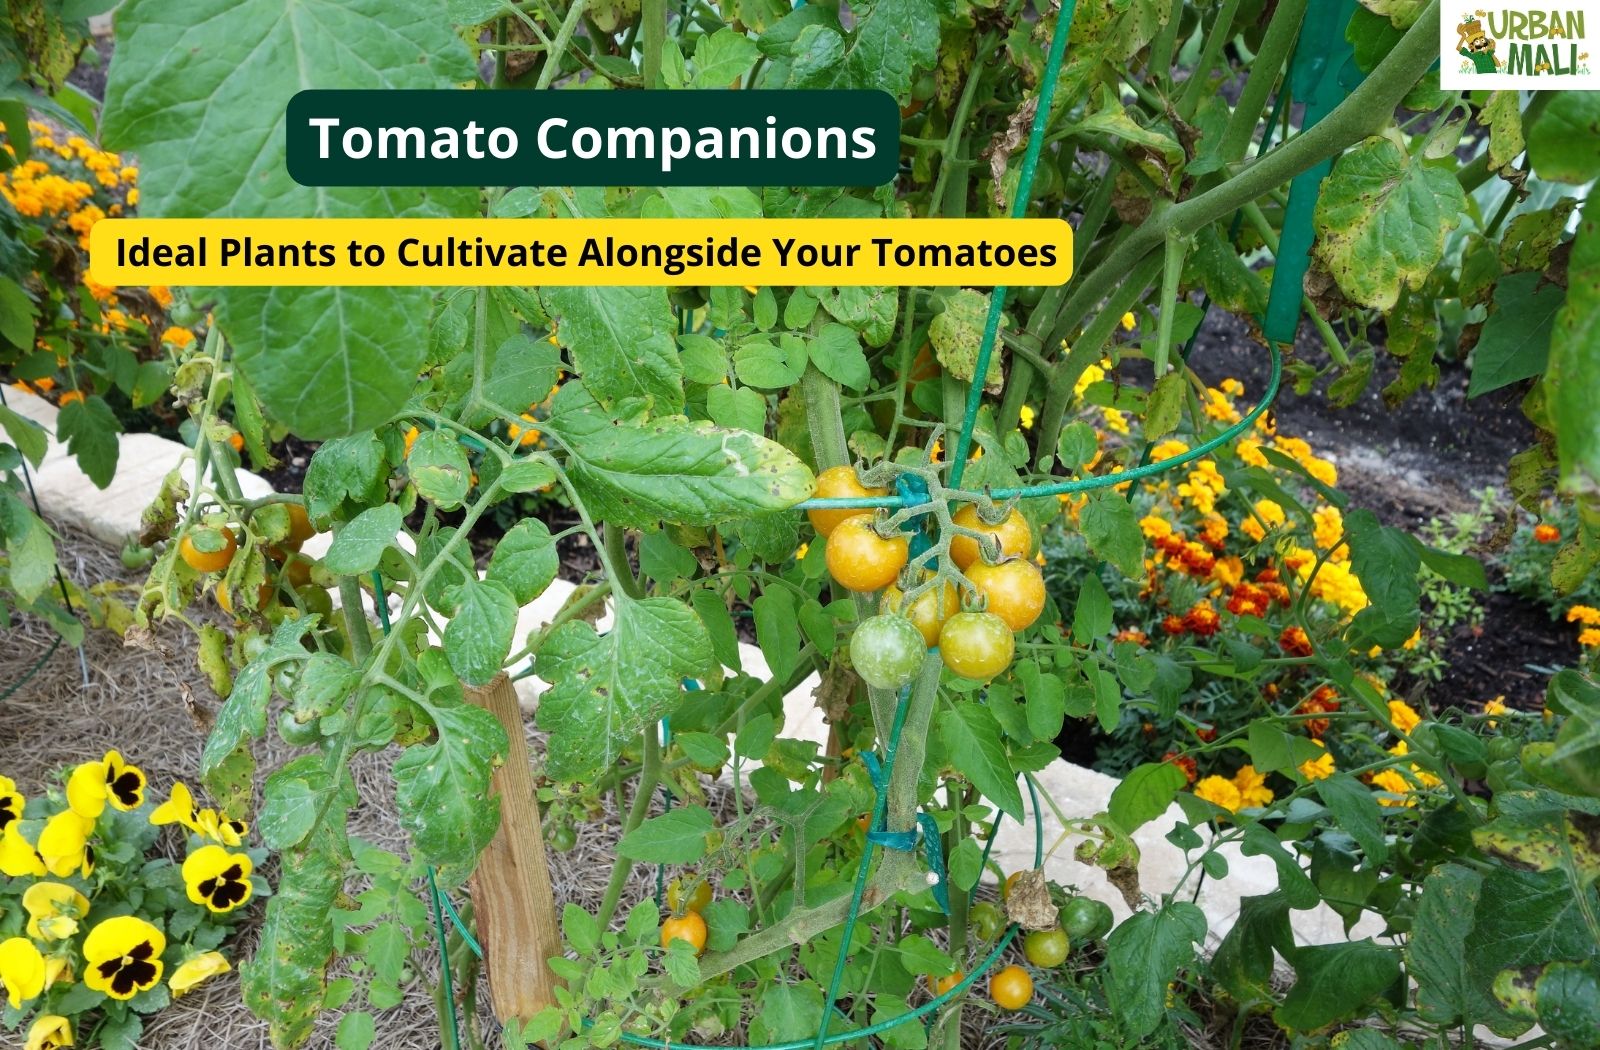 Tomato Companions: Ideal Plants to Cultivate Alongside Your Tomatoes